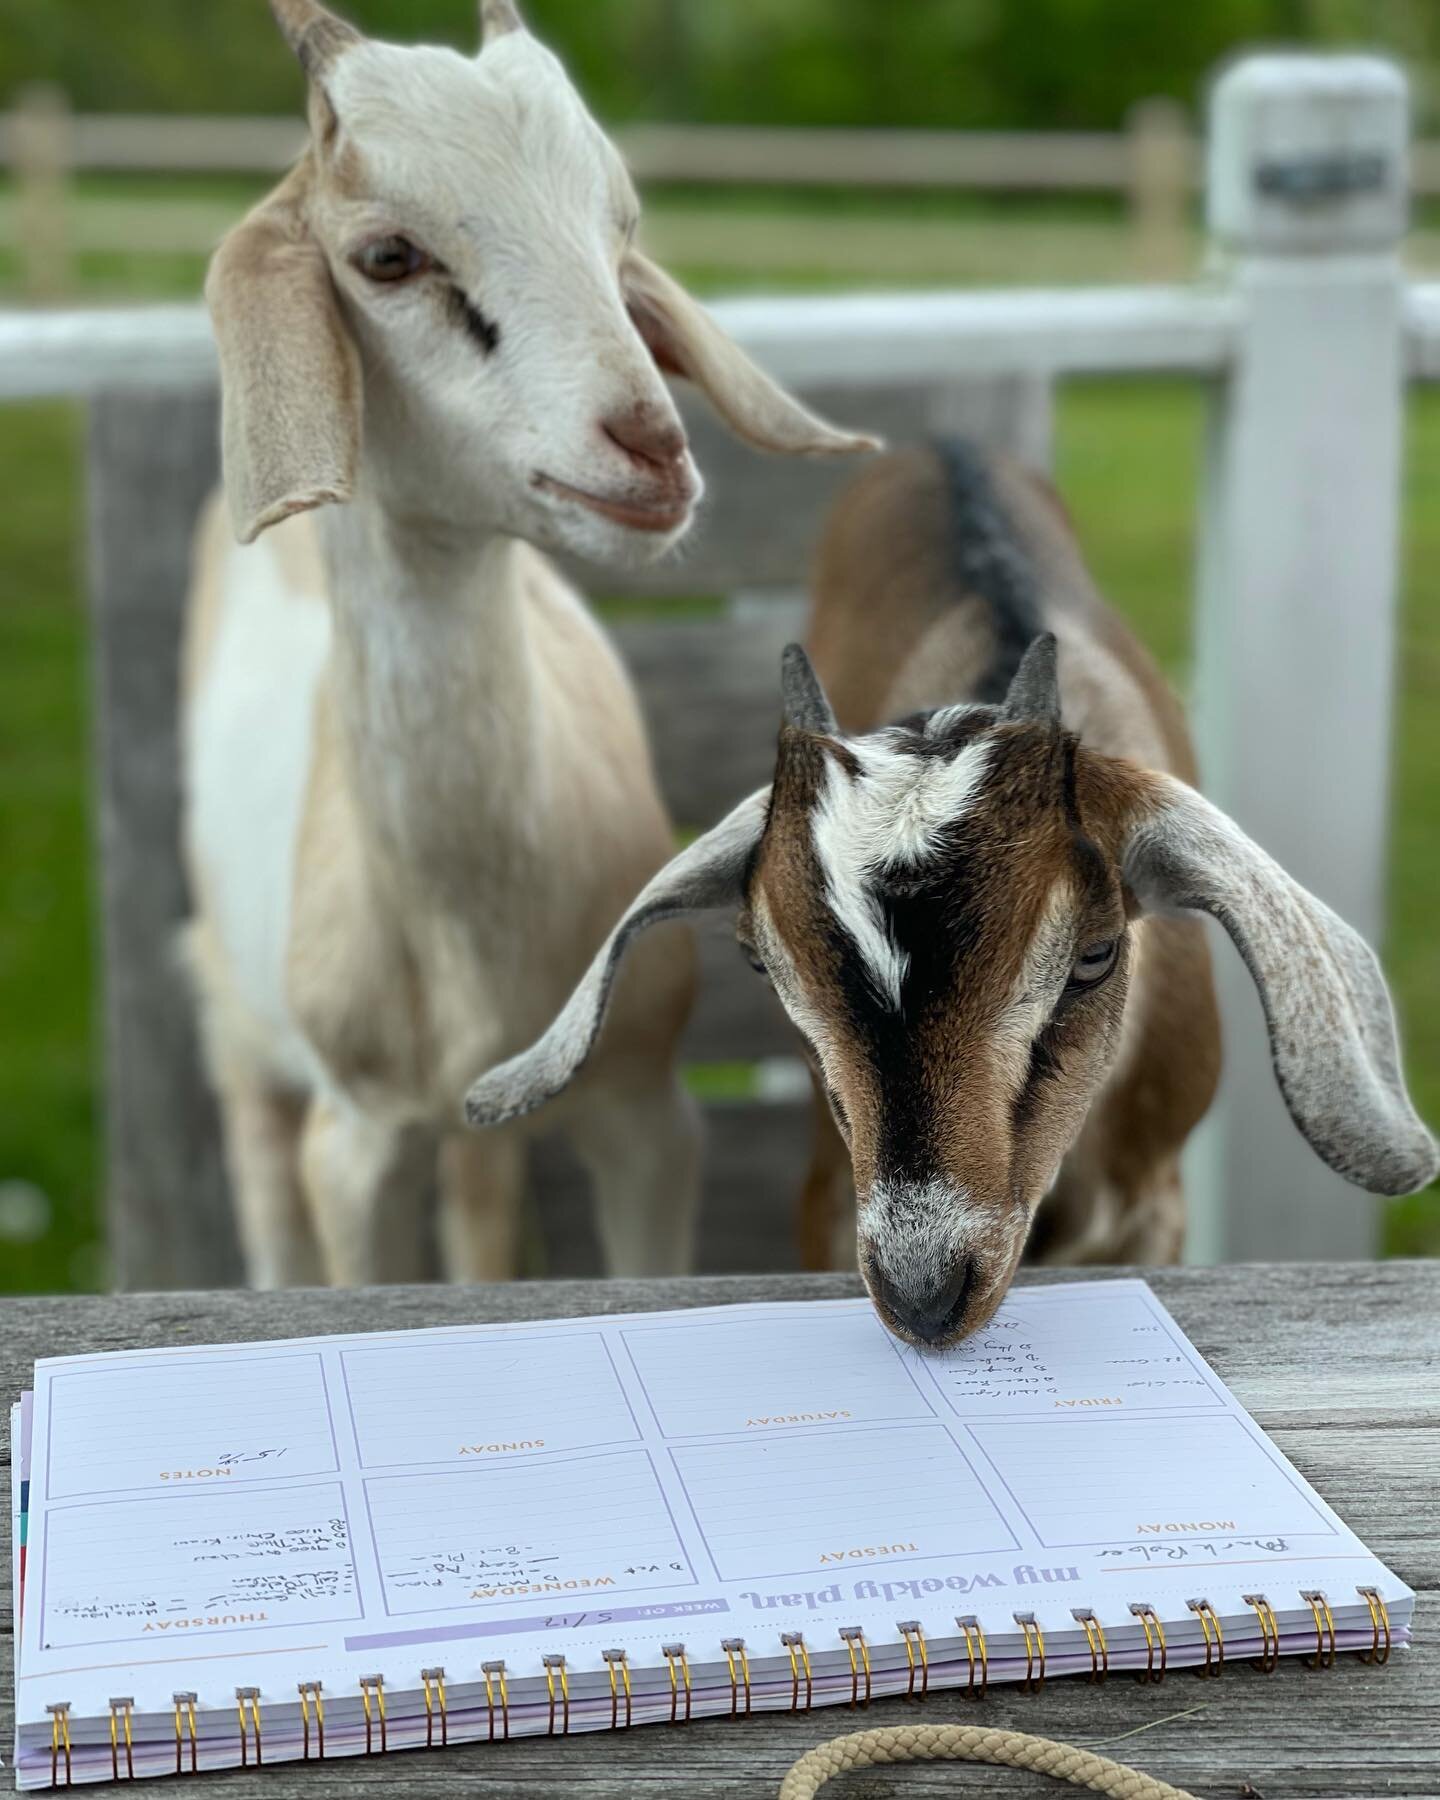 🐐 It&rsquo;s #FarmFriday! 🐖⁣⁣⠀
⁣⁣⠀
As a new mother 🤱 of baby goats, the learning curve is REAL and life is never dull.⁣⁣⠀
⁣⁣⠀
Turns out, goats are creatures of habit and prefer routines. They also have good memories and will remember bad experienc